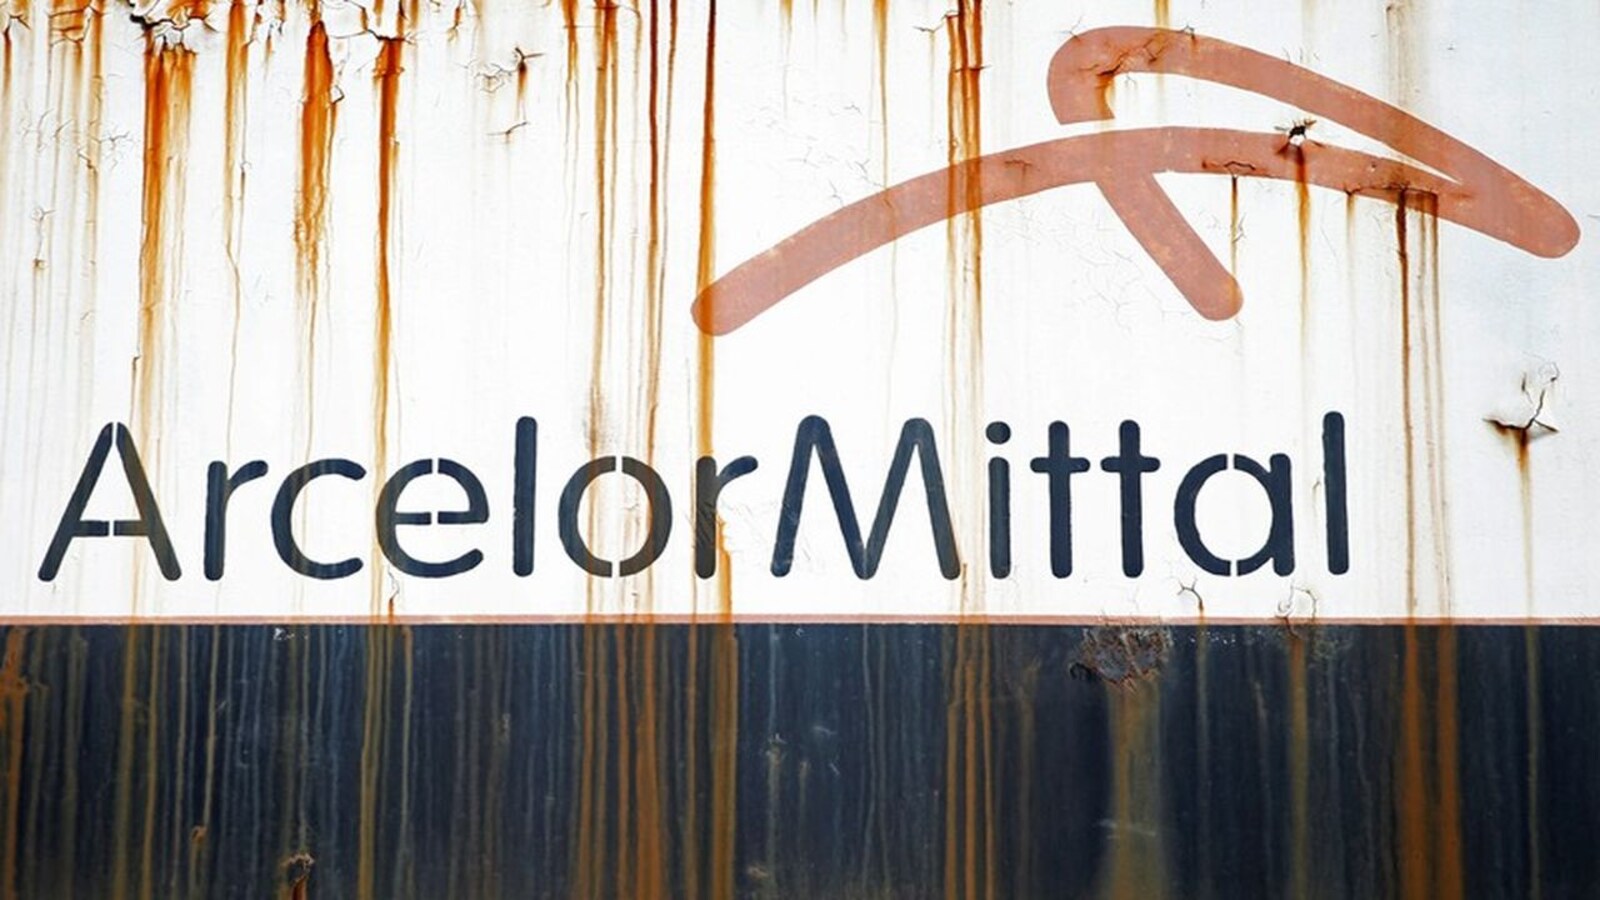 Son of founder Mital becomes CEO of ArcelorMittal after improving